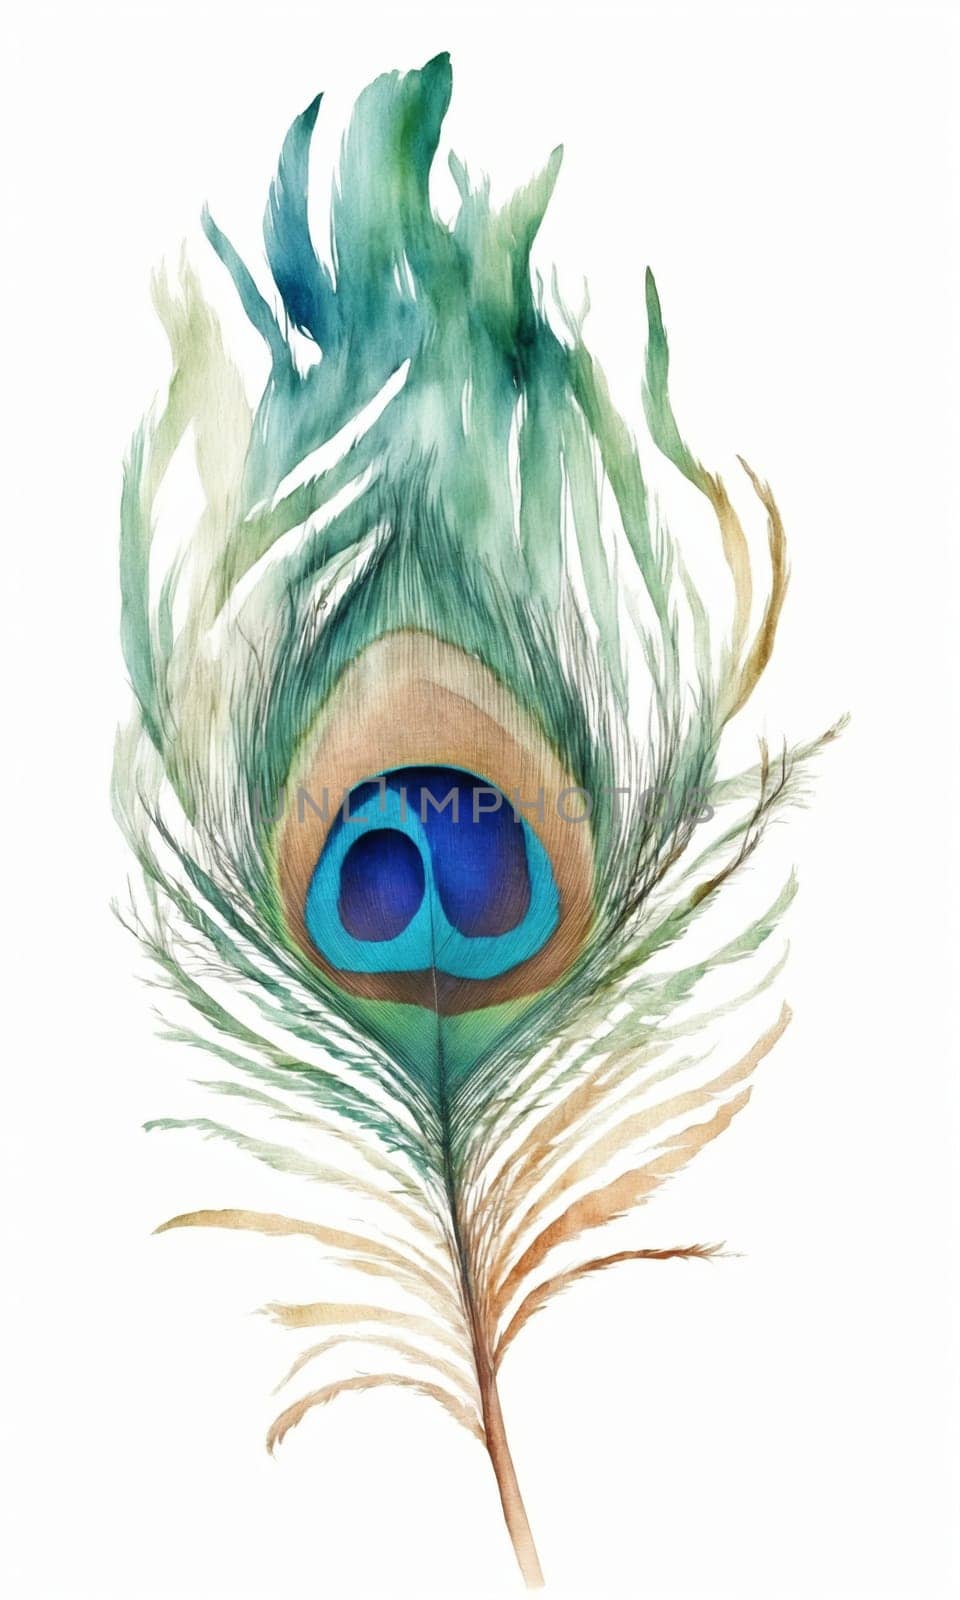 Watercolor peacock feather on white background. Hand drawn illustration. by Andre1ns